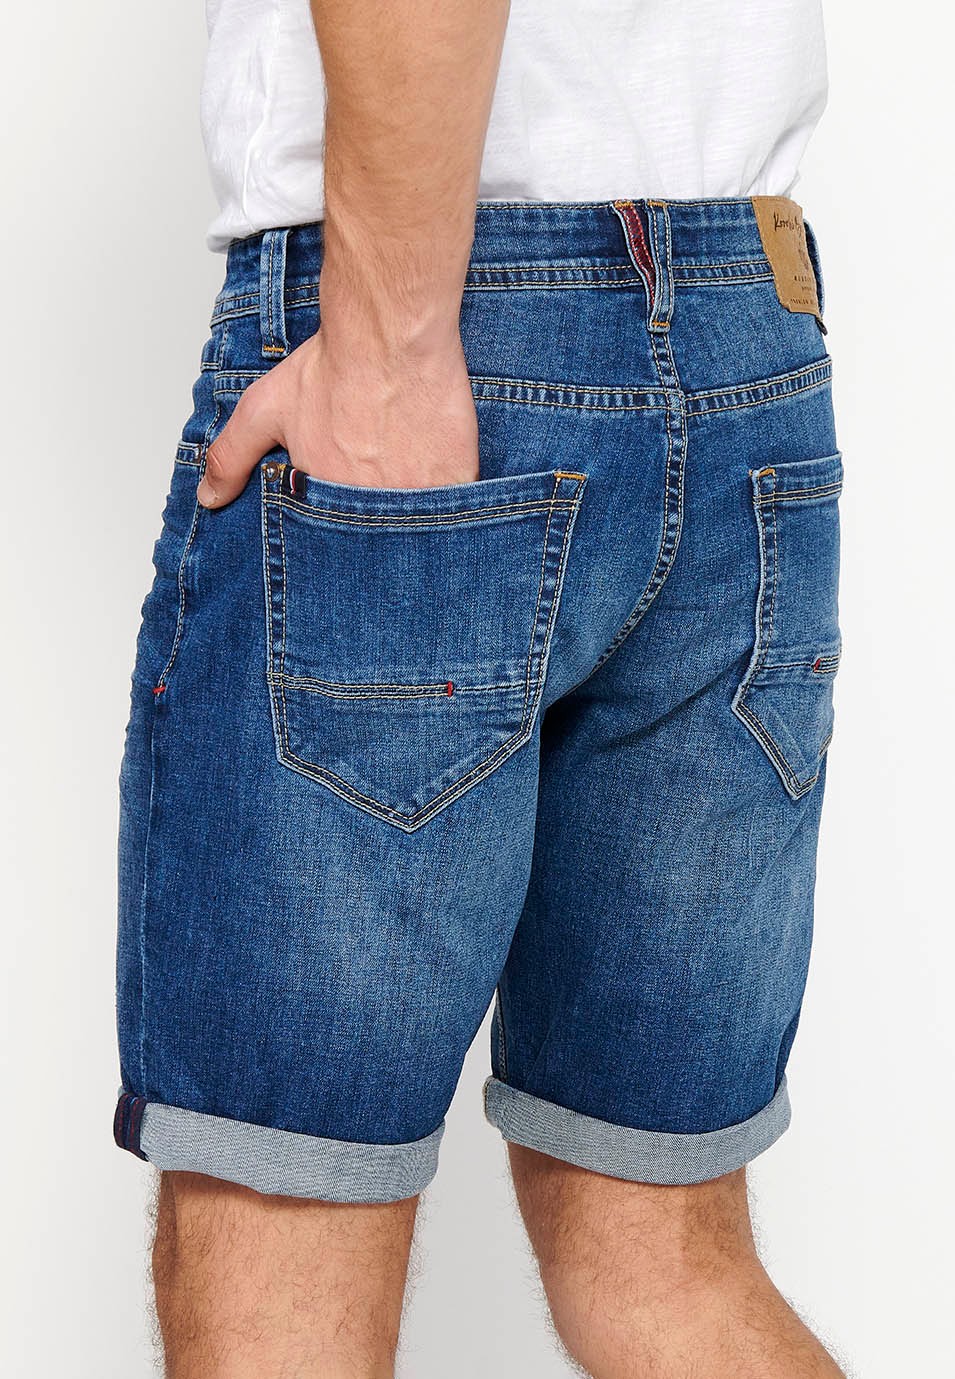 Bermuda denim shorts with front zipper and button closure with five pockets, one blue pocket pocket for Men